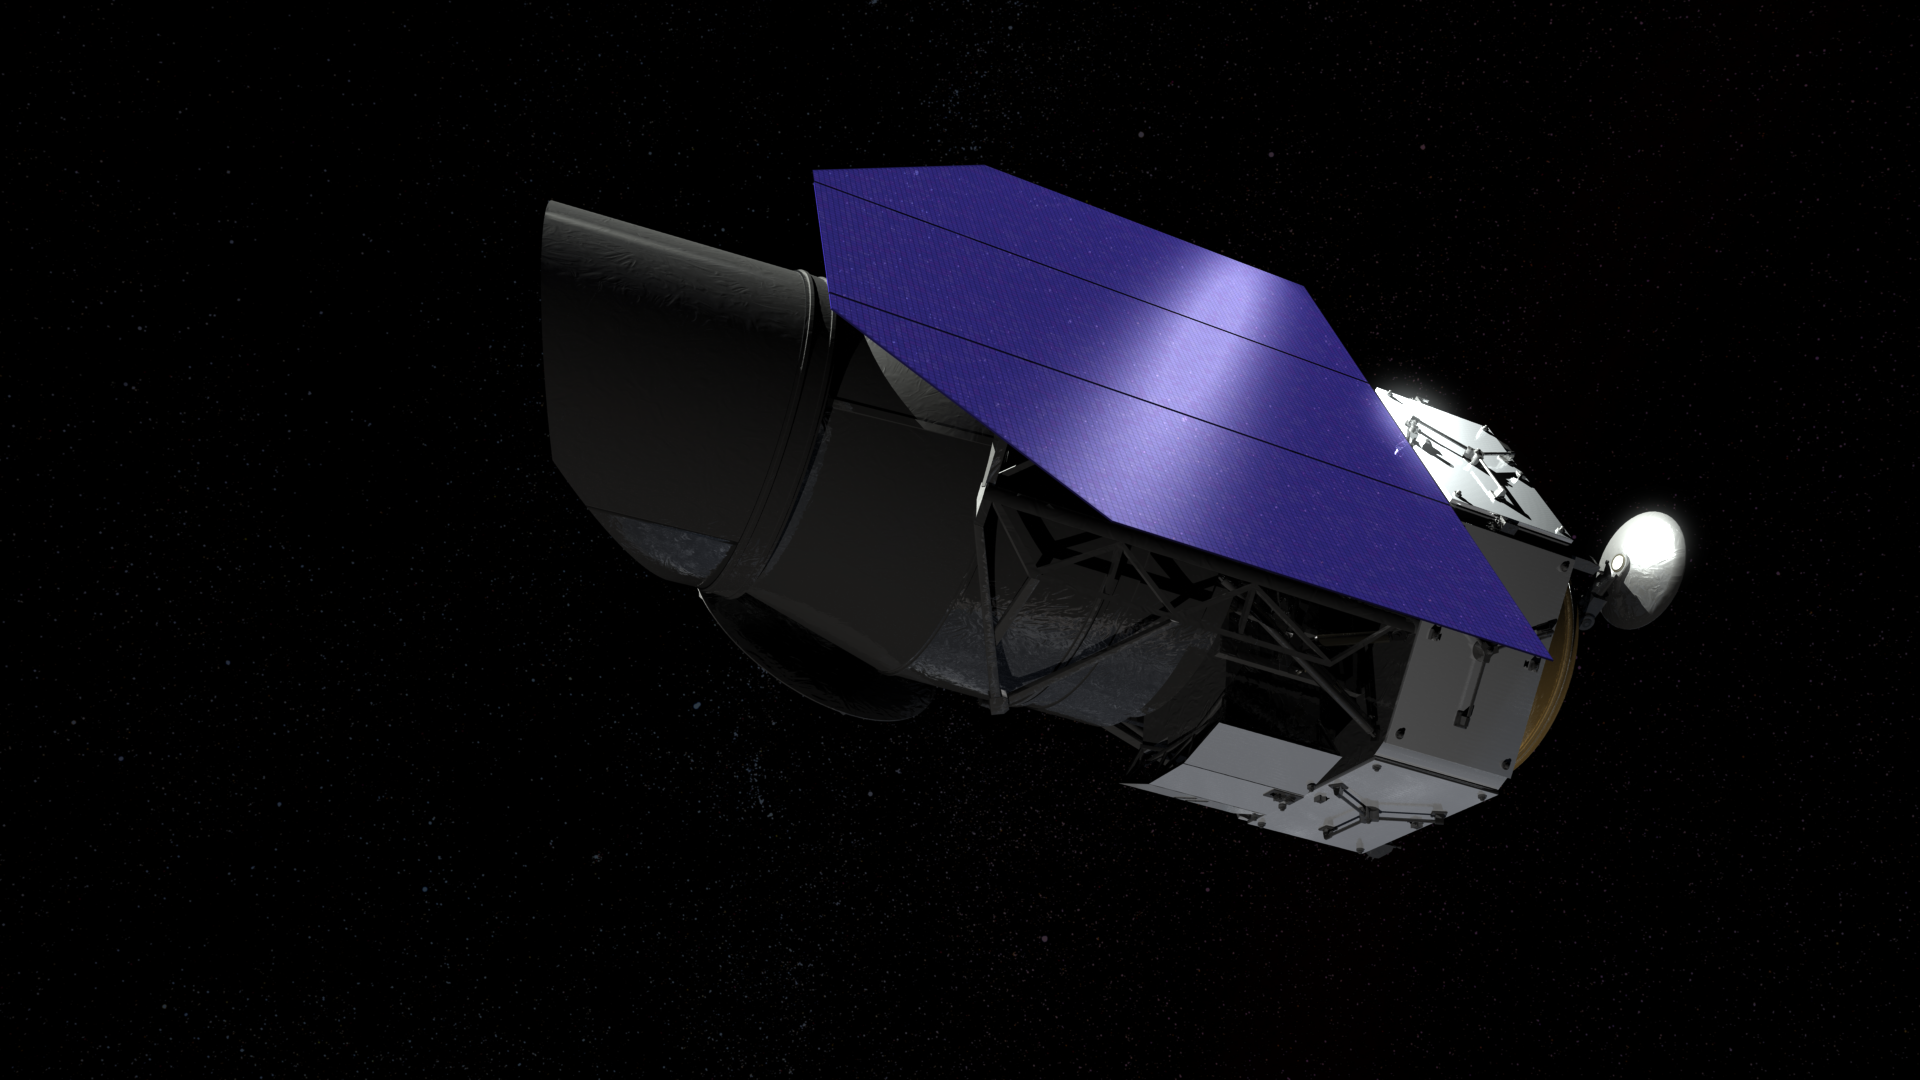 "Beauty pass" animation of WFIRST spacecraft